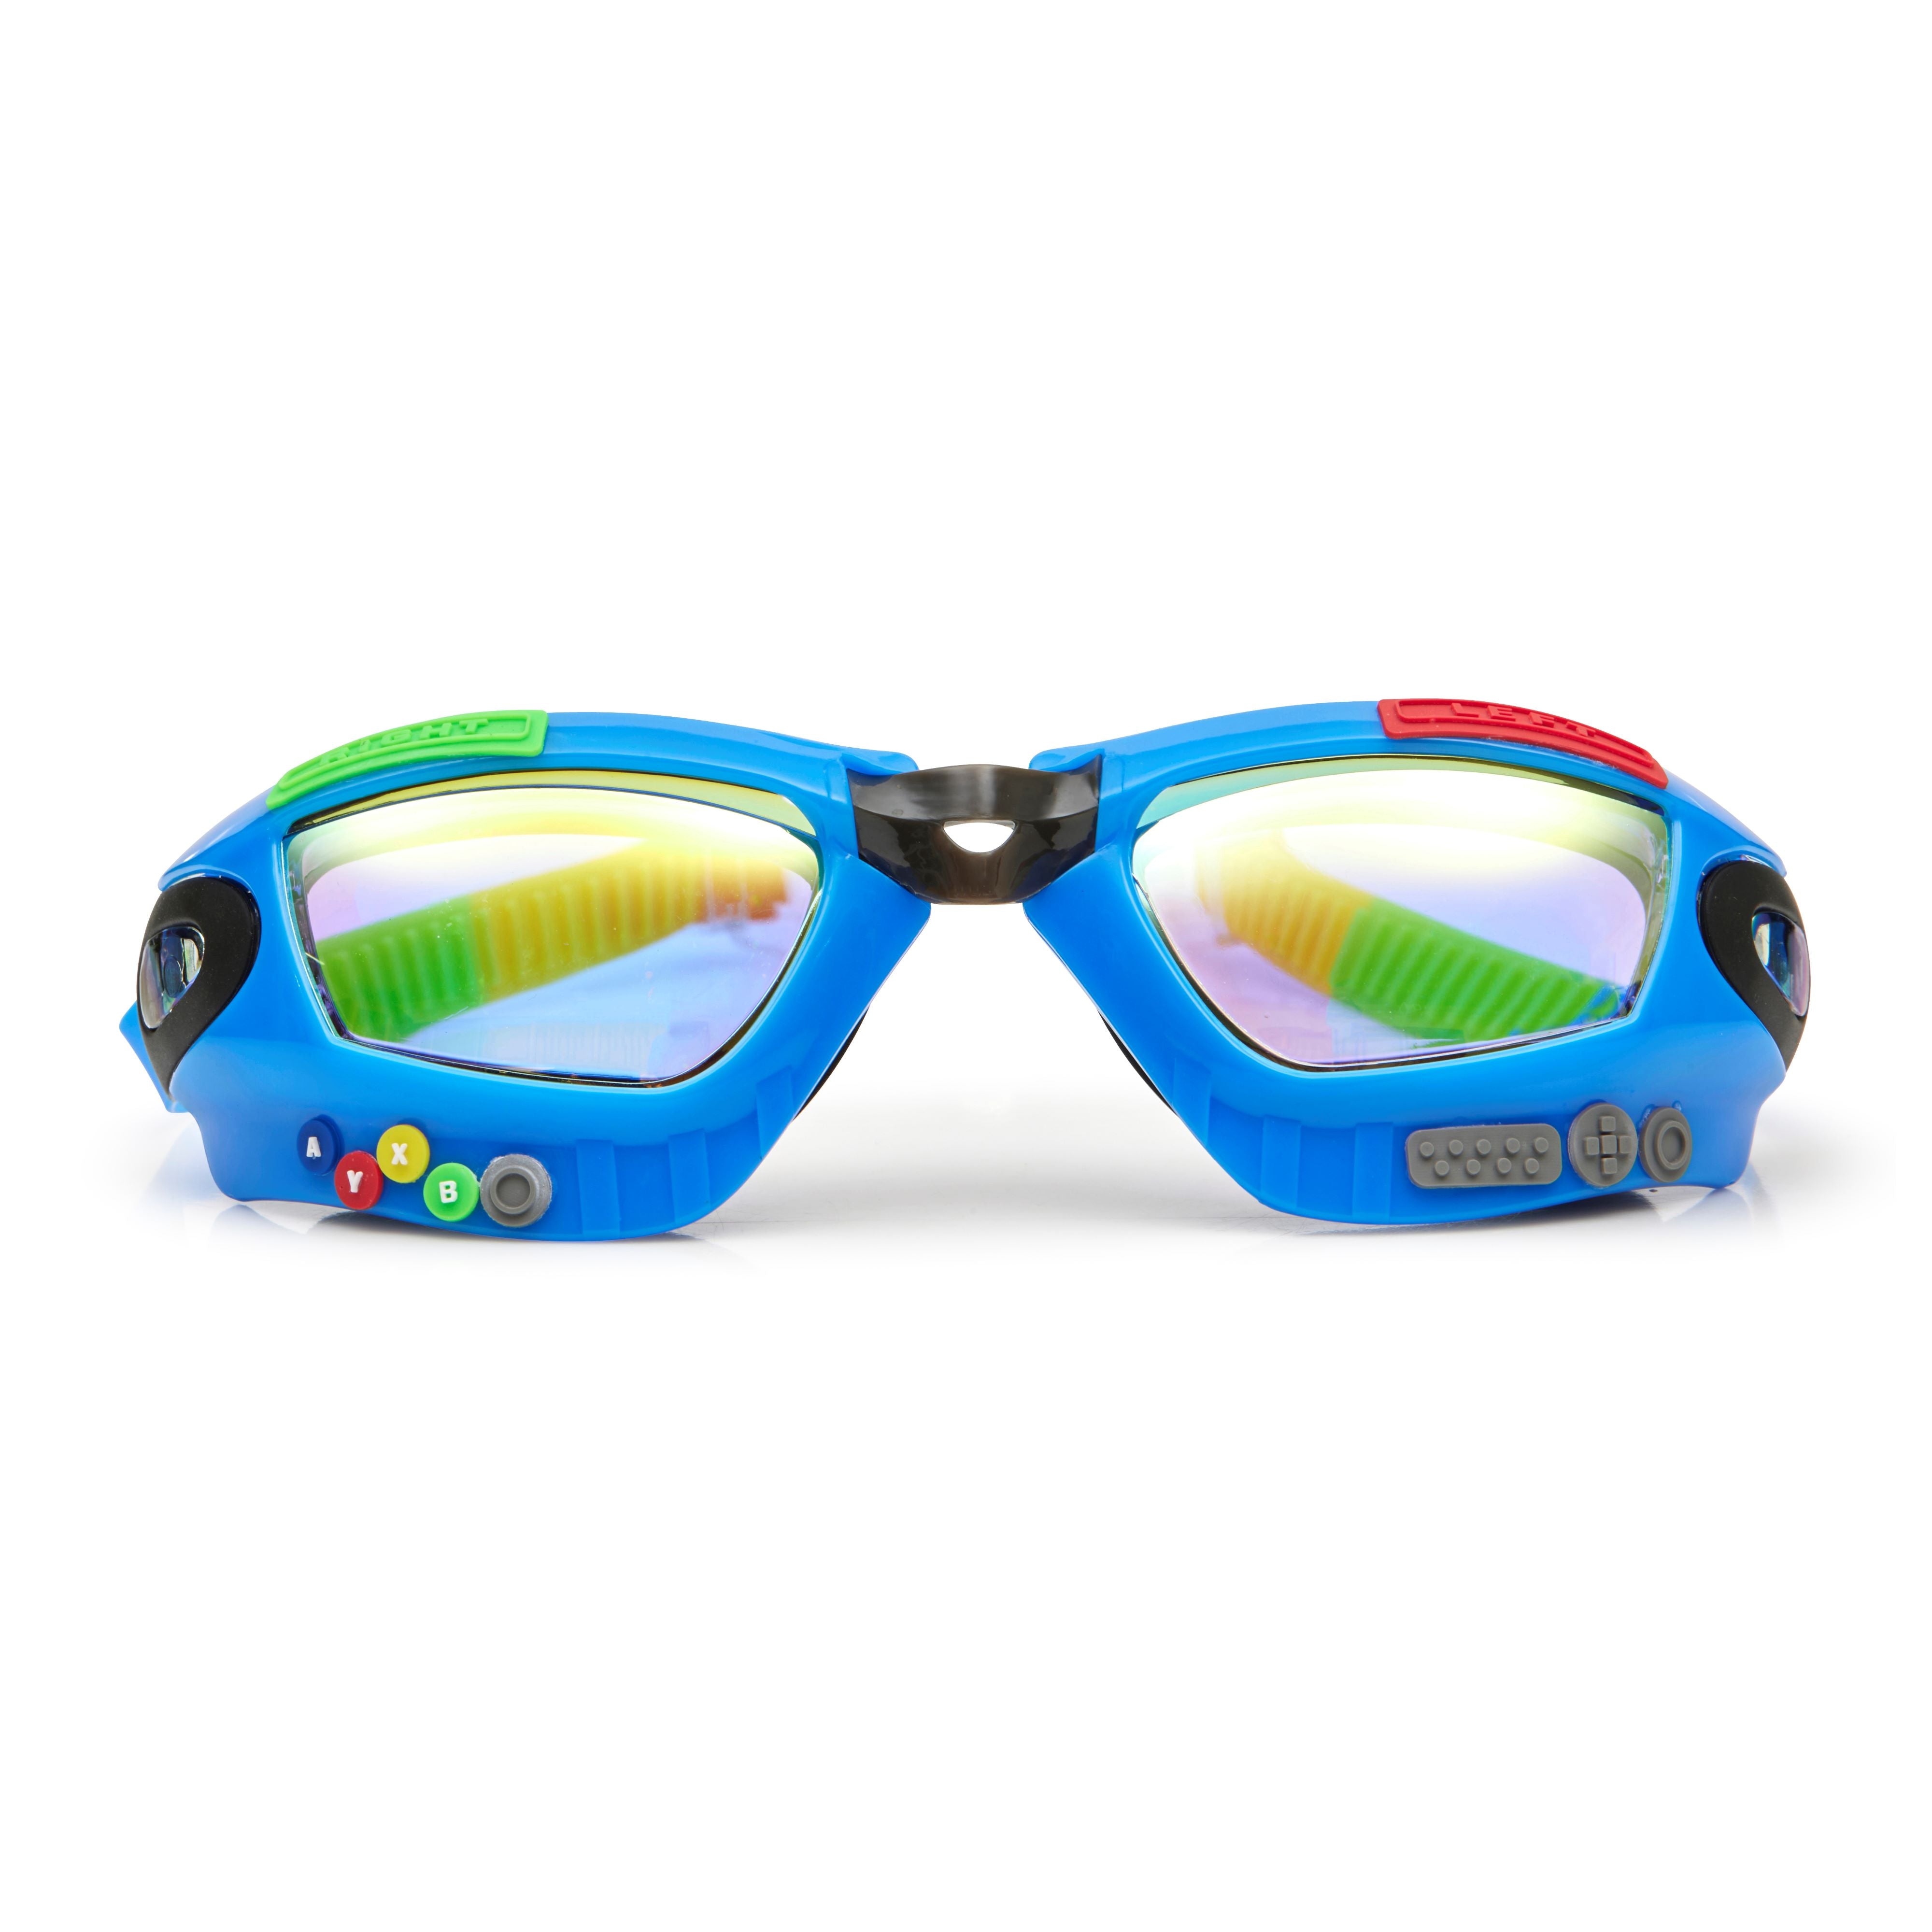 Bling2o Goggles Gamer - Console Blue